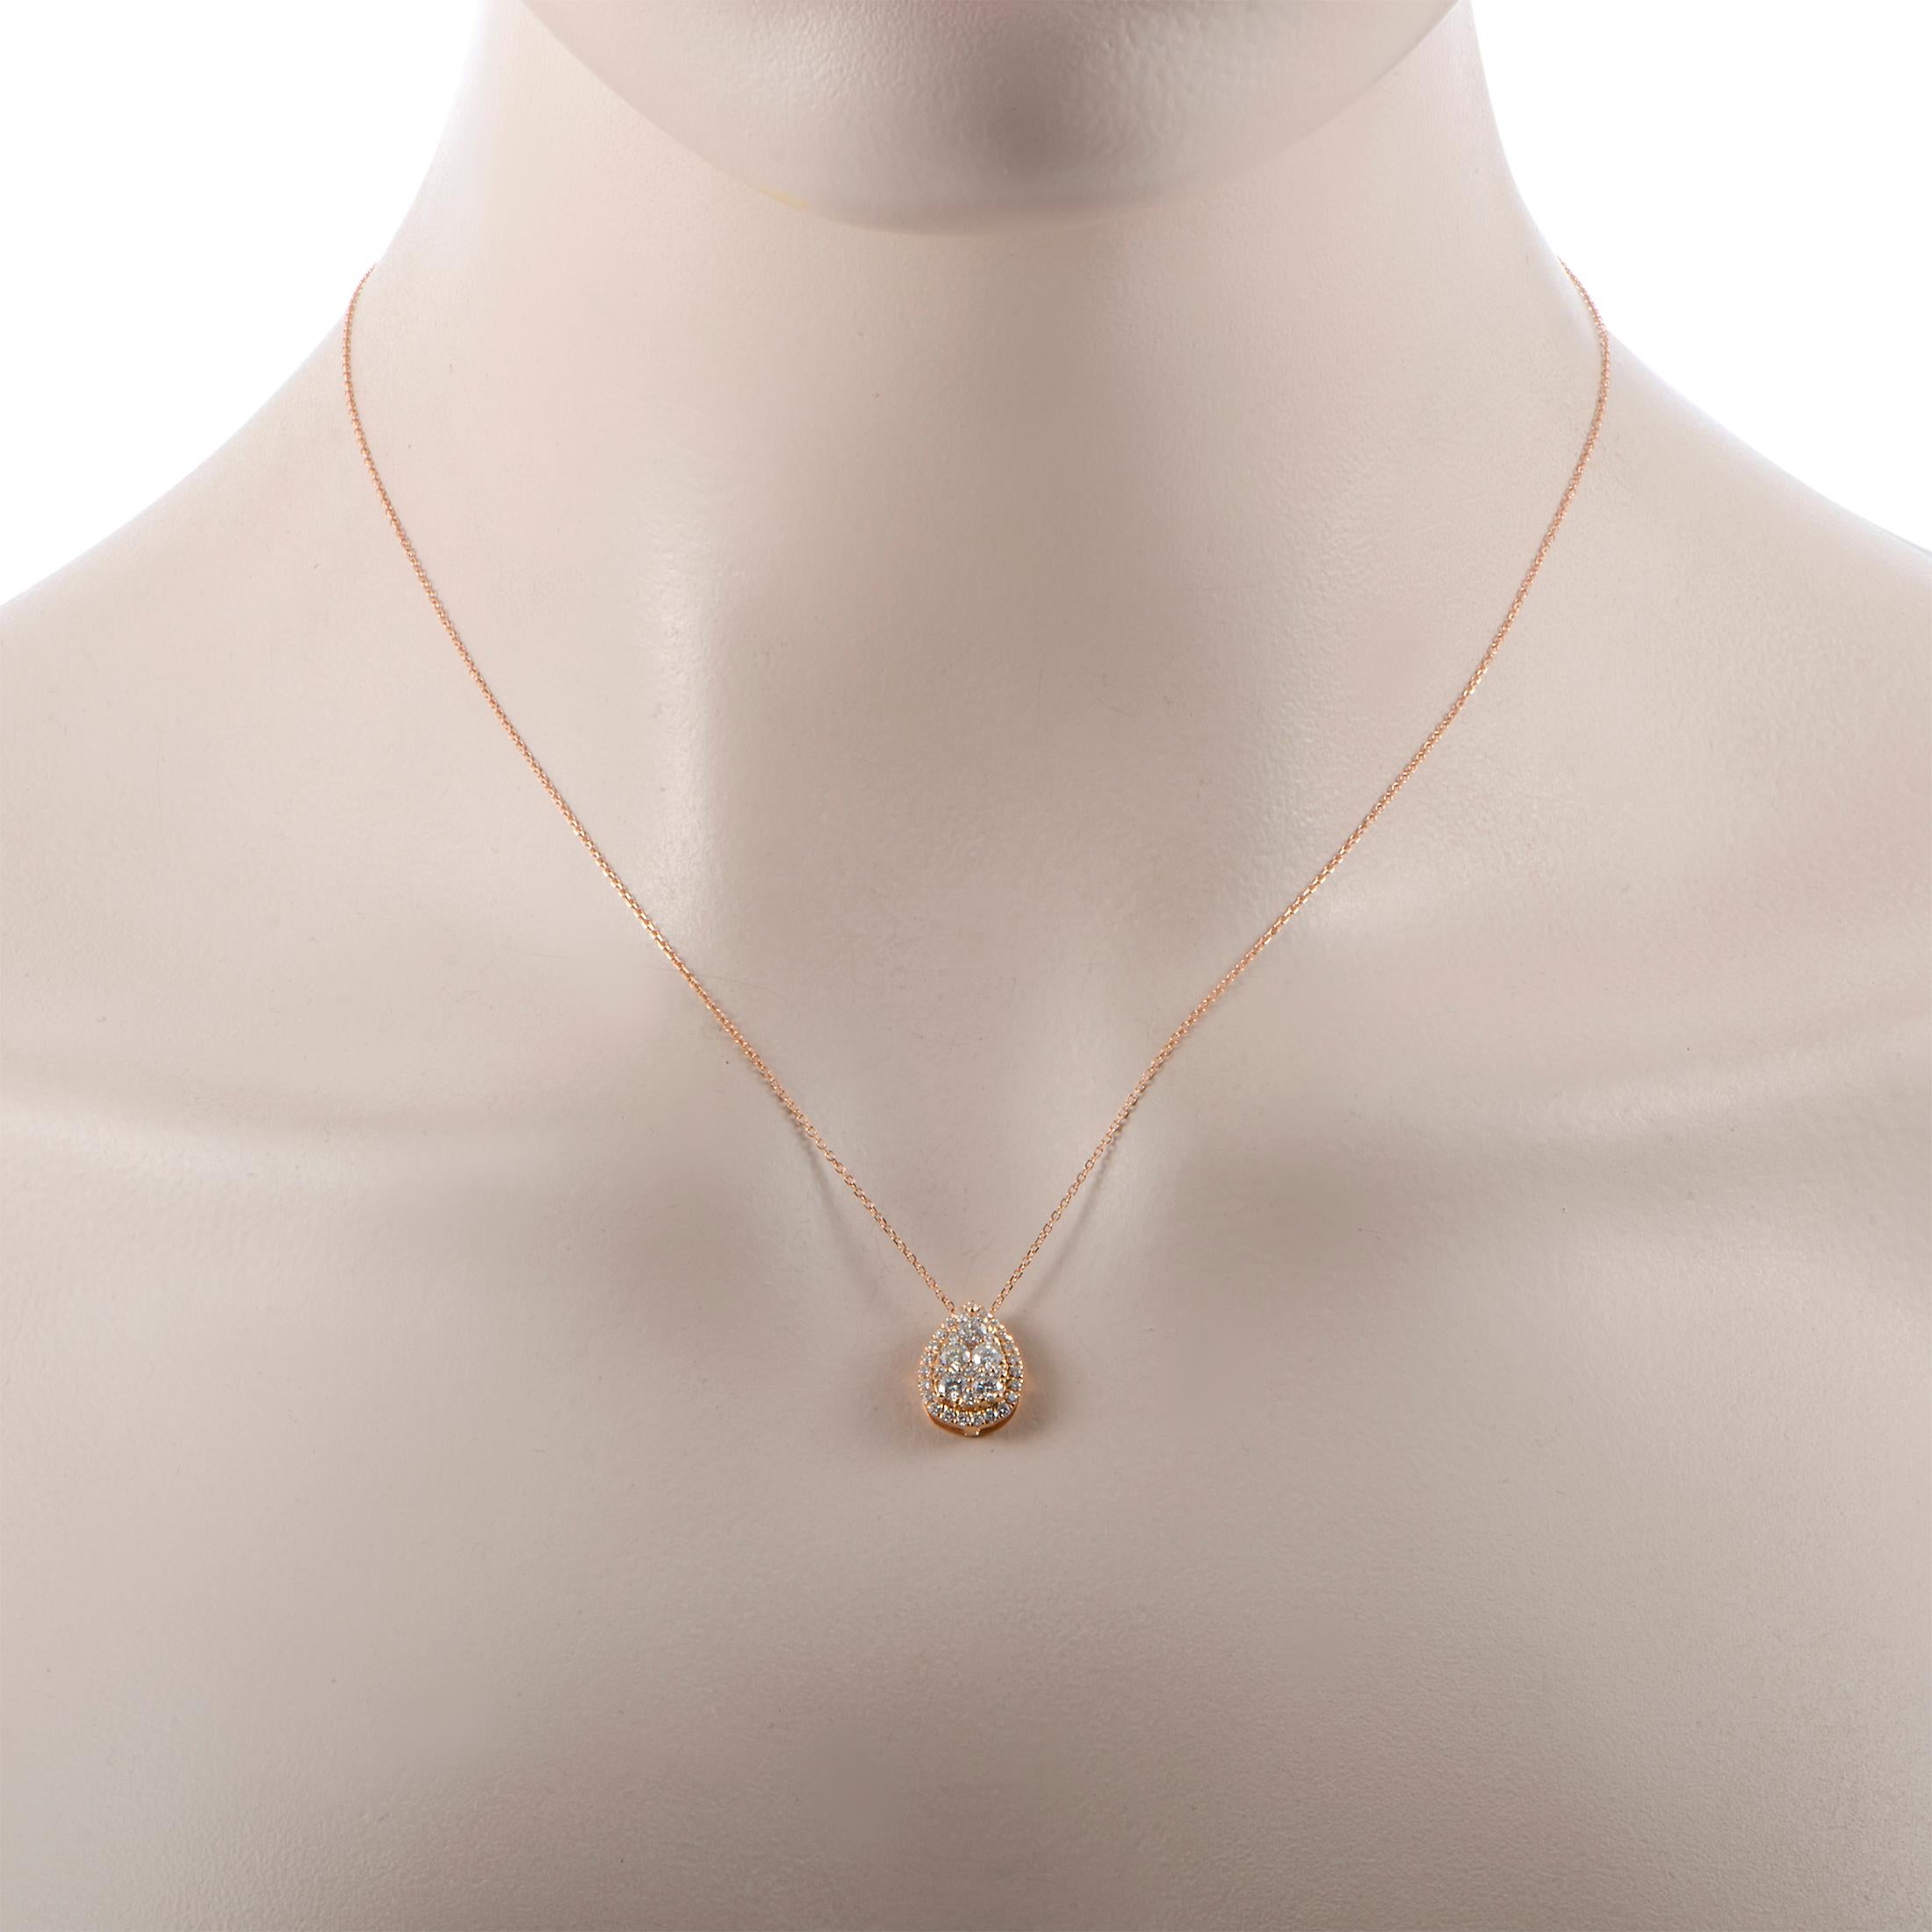 This LB Exclusive necklace is made out of 18K rose gold and diamonds that total 0.70 carats. The necklace weighs 3.3 grams and boasts an 18” chain and a pendant that measures 0.55” in length and 0.37” in width.

Offered in brand new condition, this